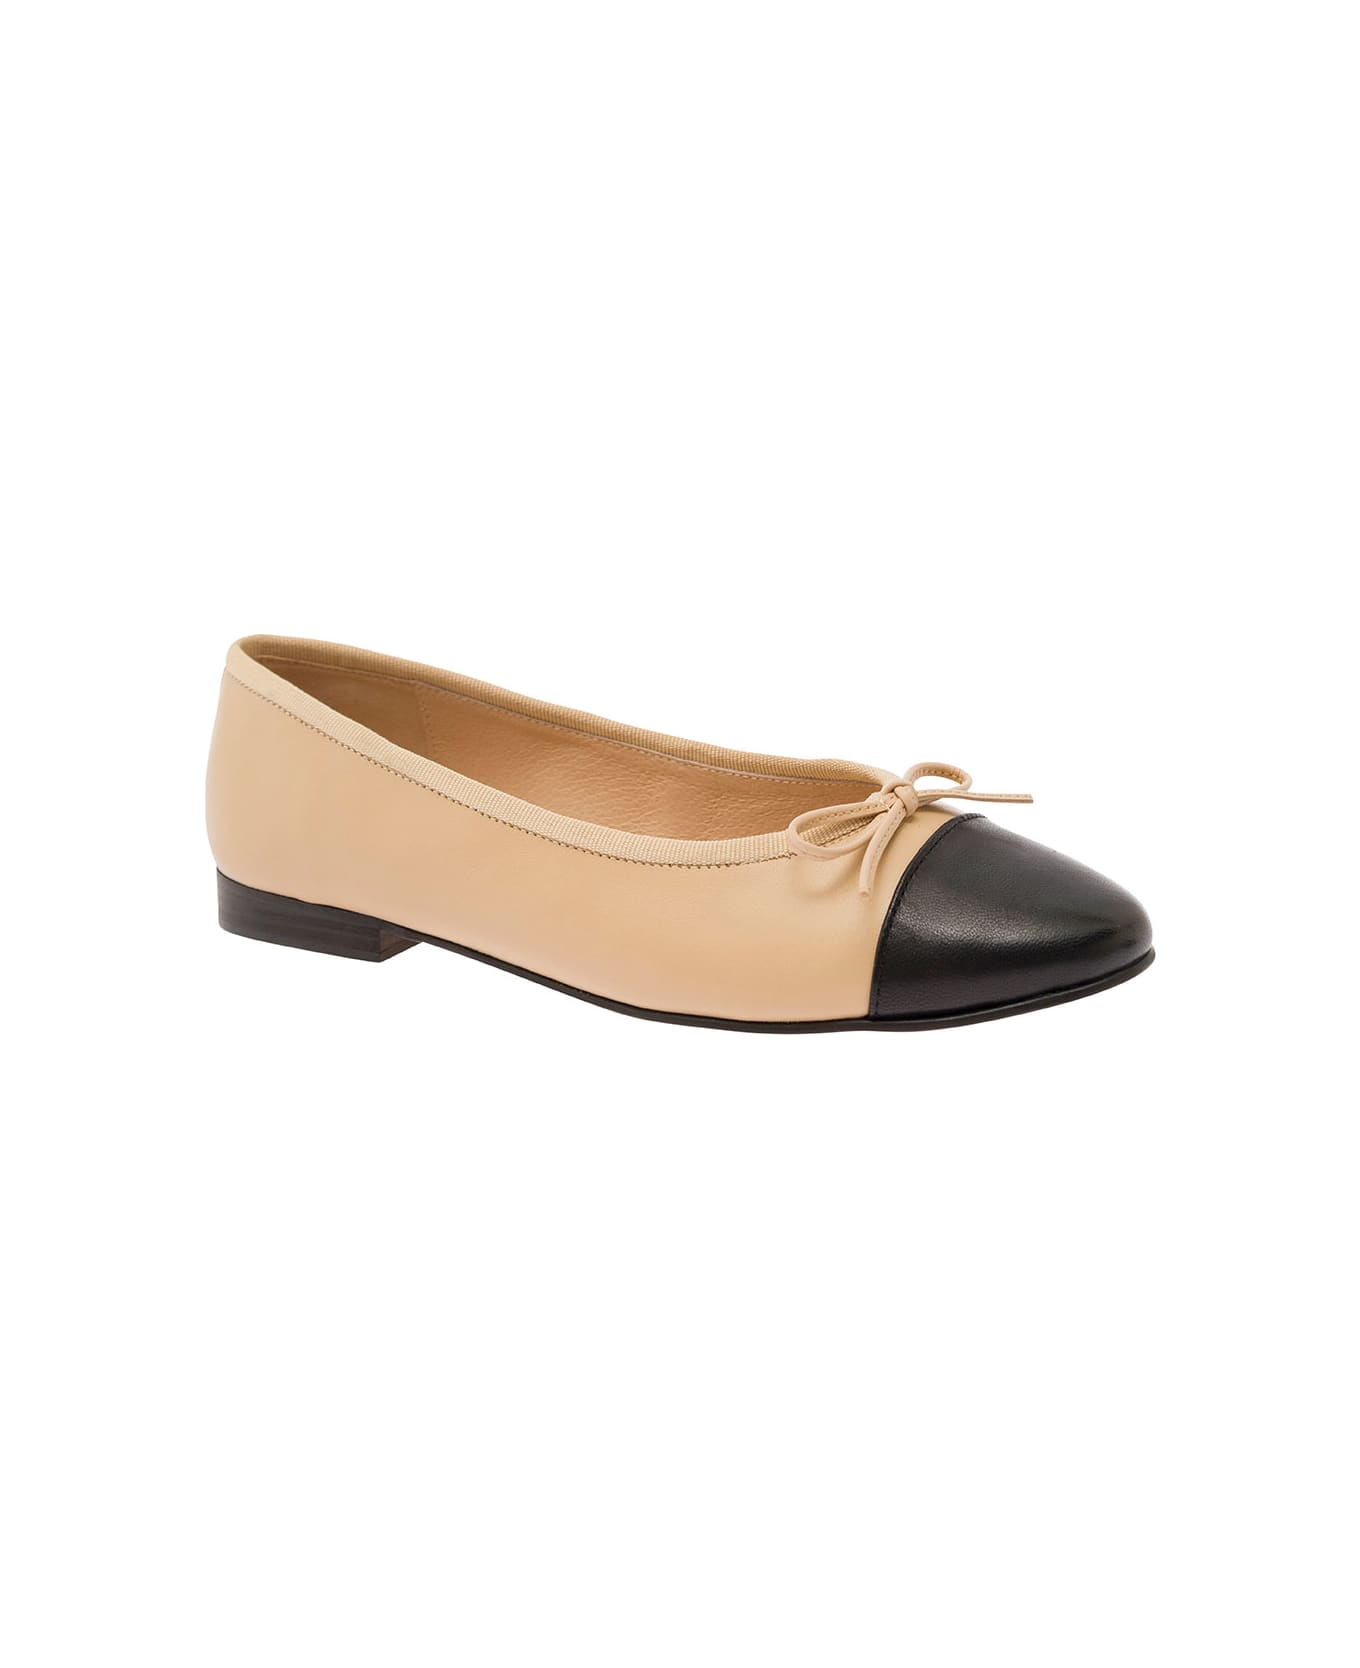 Jeffrey Campbell Beige Ballet Flats With Contrasting Toe And Bow In Leather Woman - Beige フラットシューズ